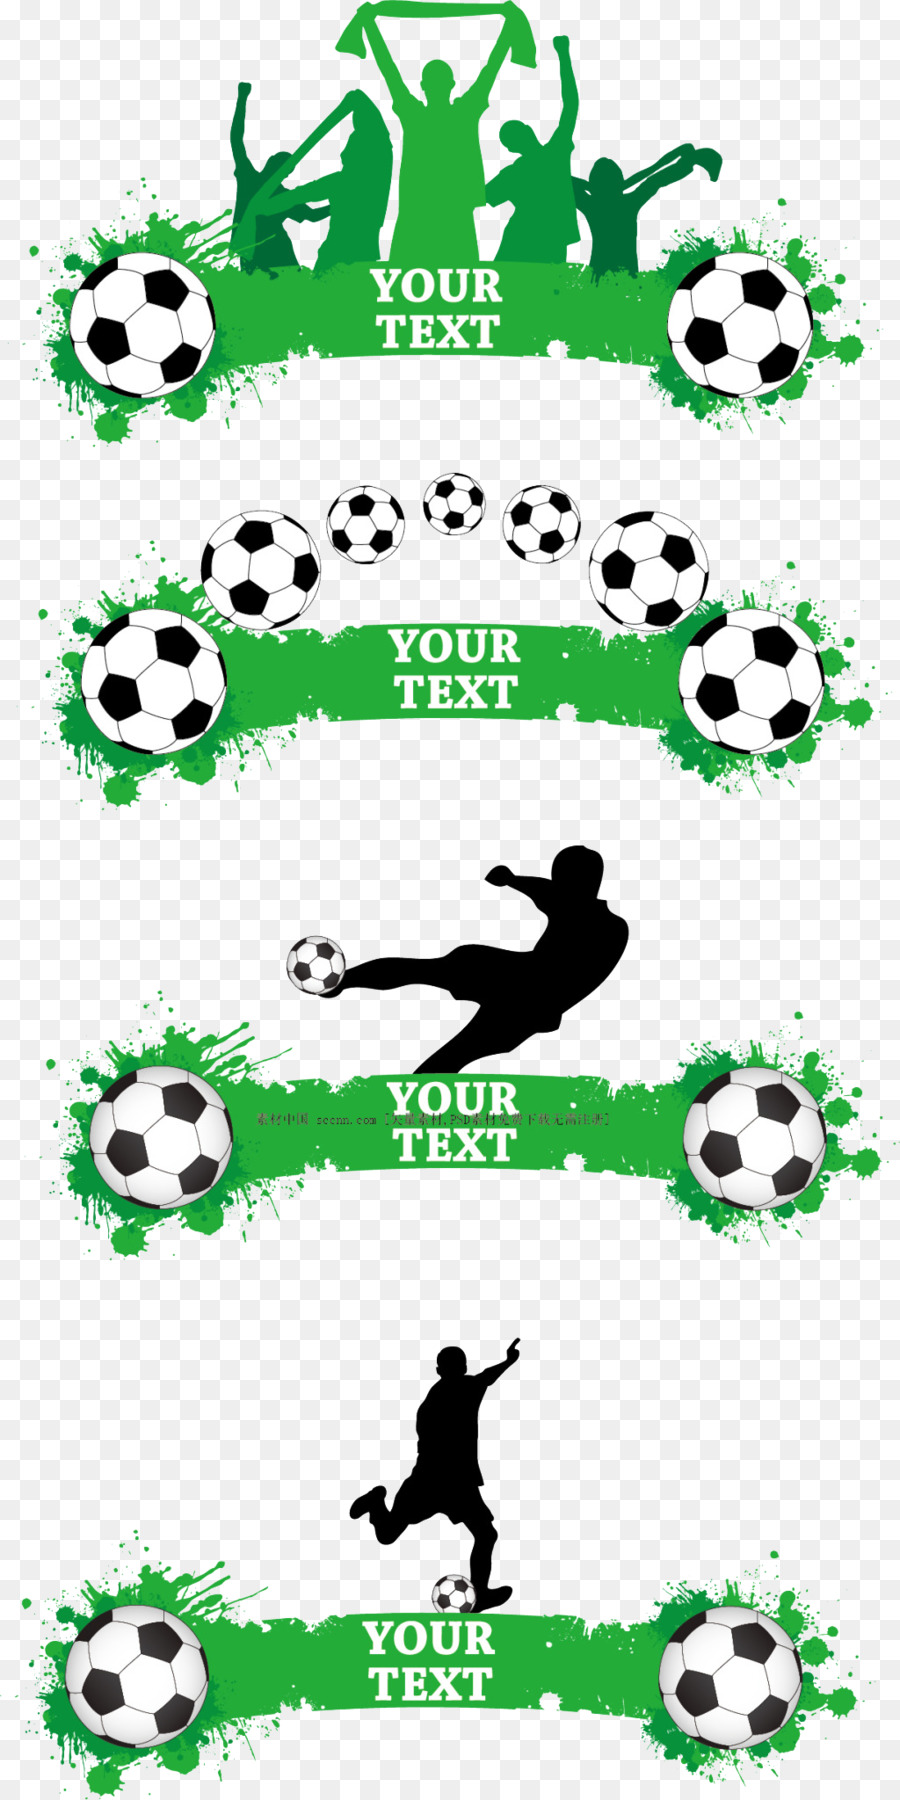 Football Banner - Football theme banner vector png download - 1024*2048 - Free Transparent Football png Download.